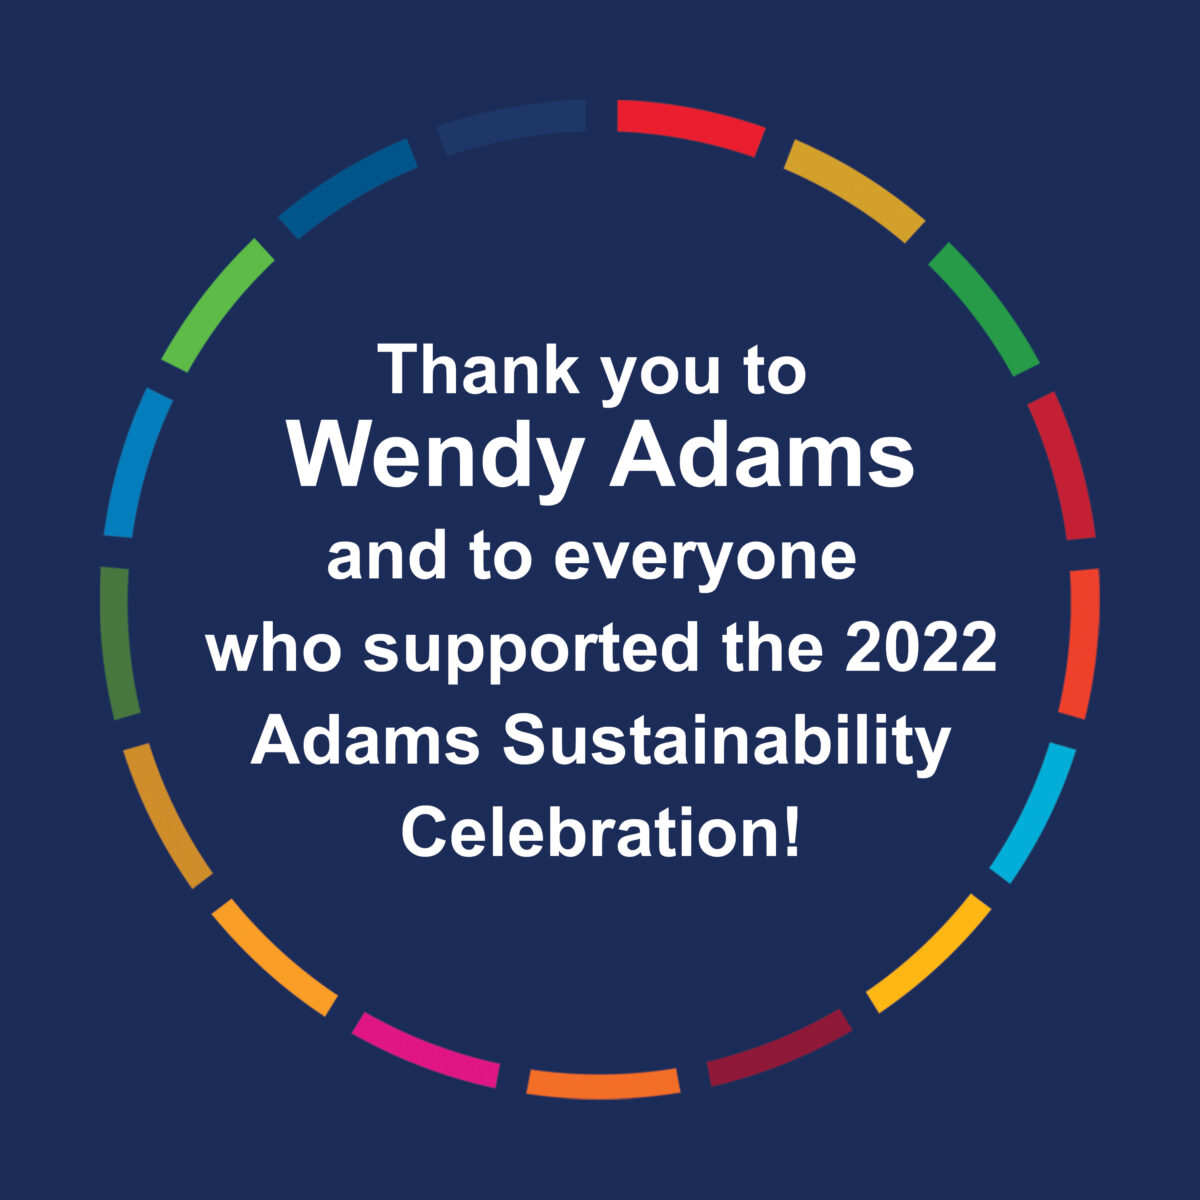 Thank you to Wendy Adams and to everyone who supported the 2022 Adams Sustainability Celebration!